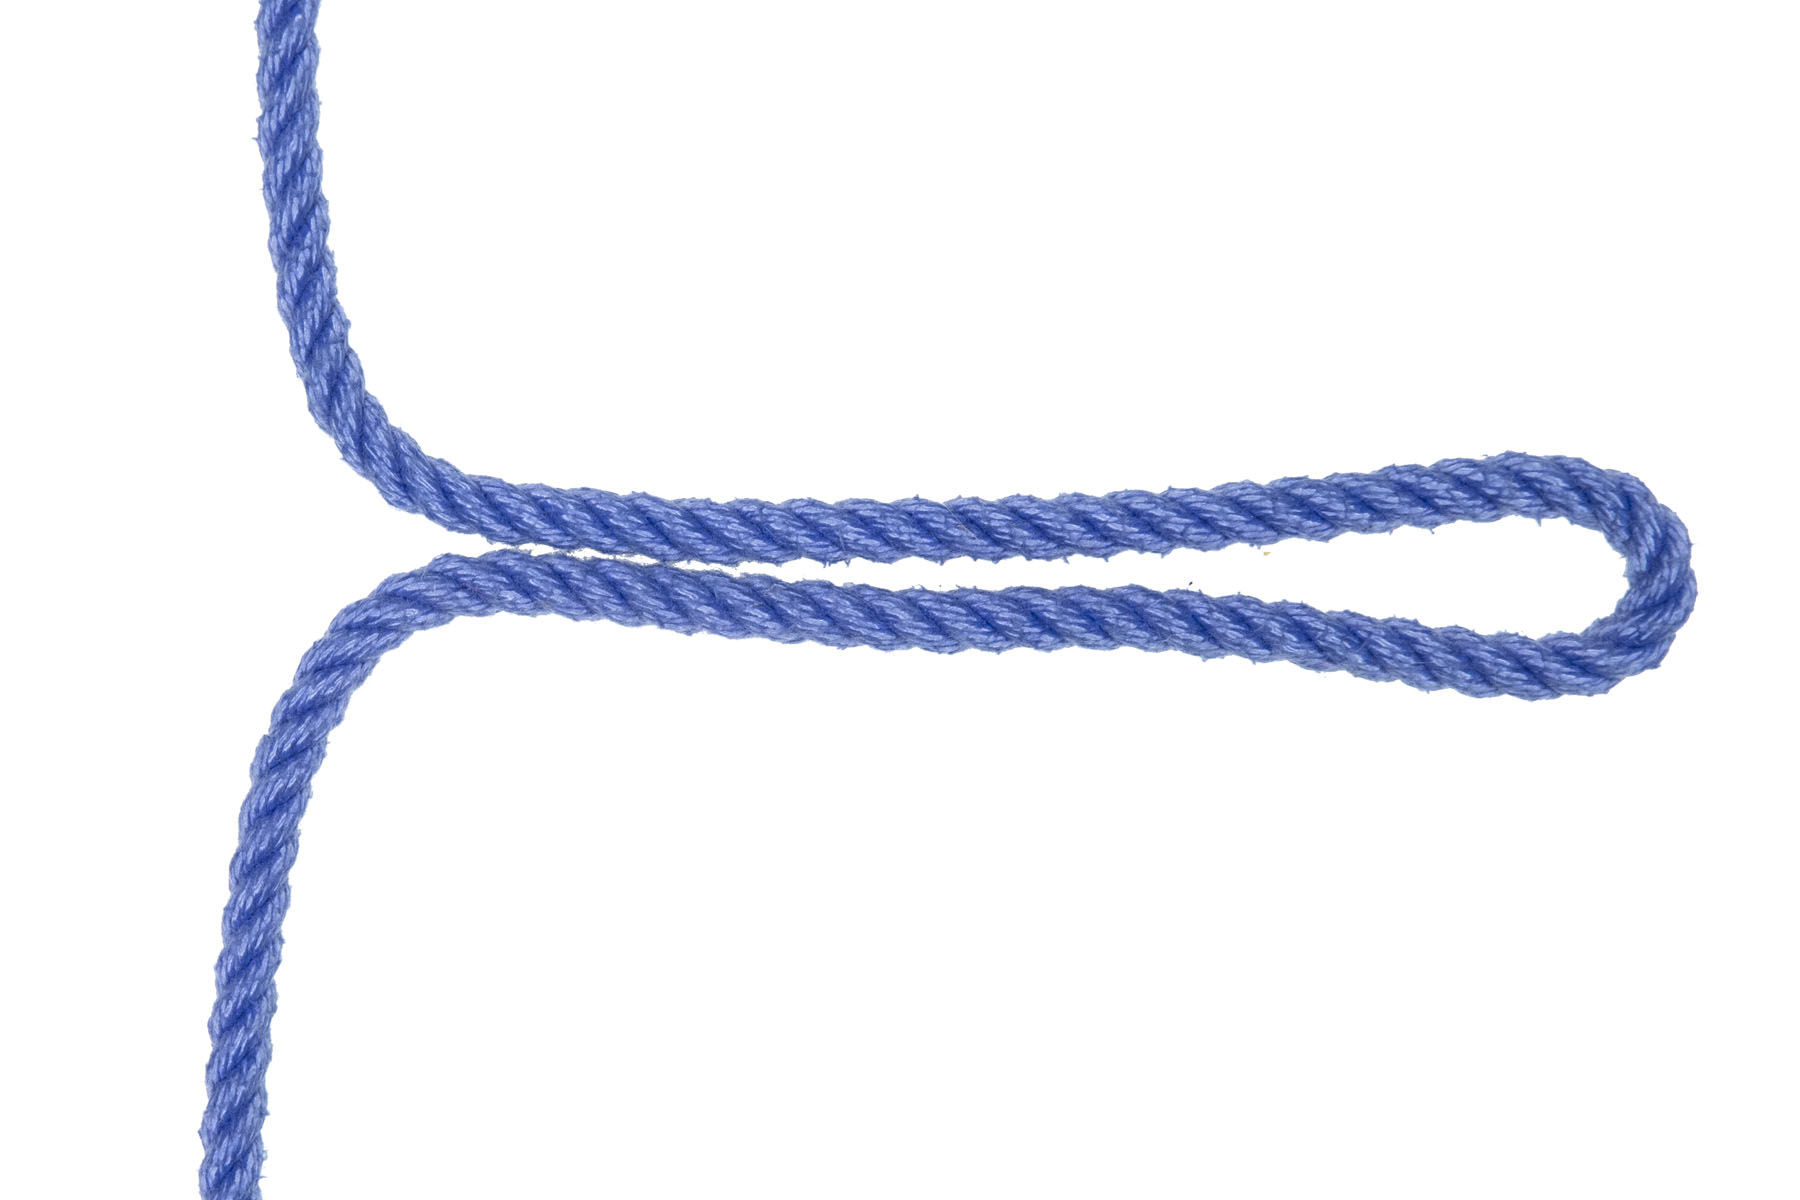 A single blue rope enters from the top. In the center of the frame, an eight inch long bight has been pulled out to the right. The remainder of the rope exits at the bottom.